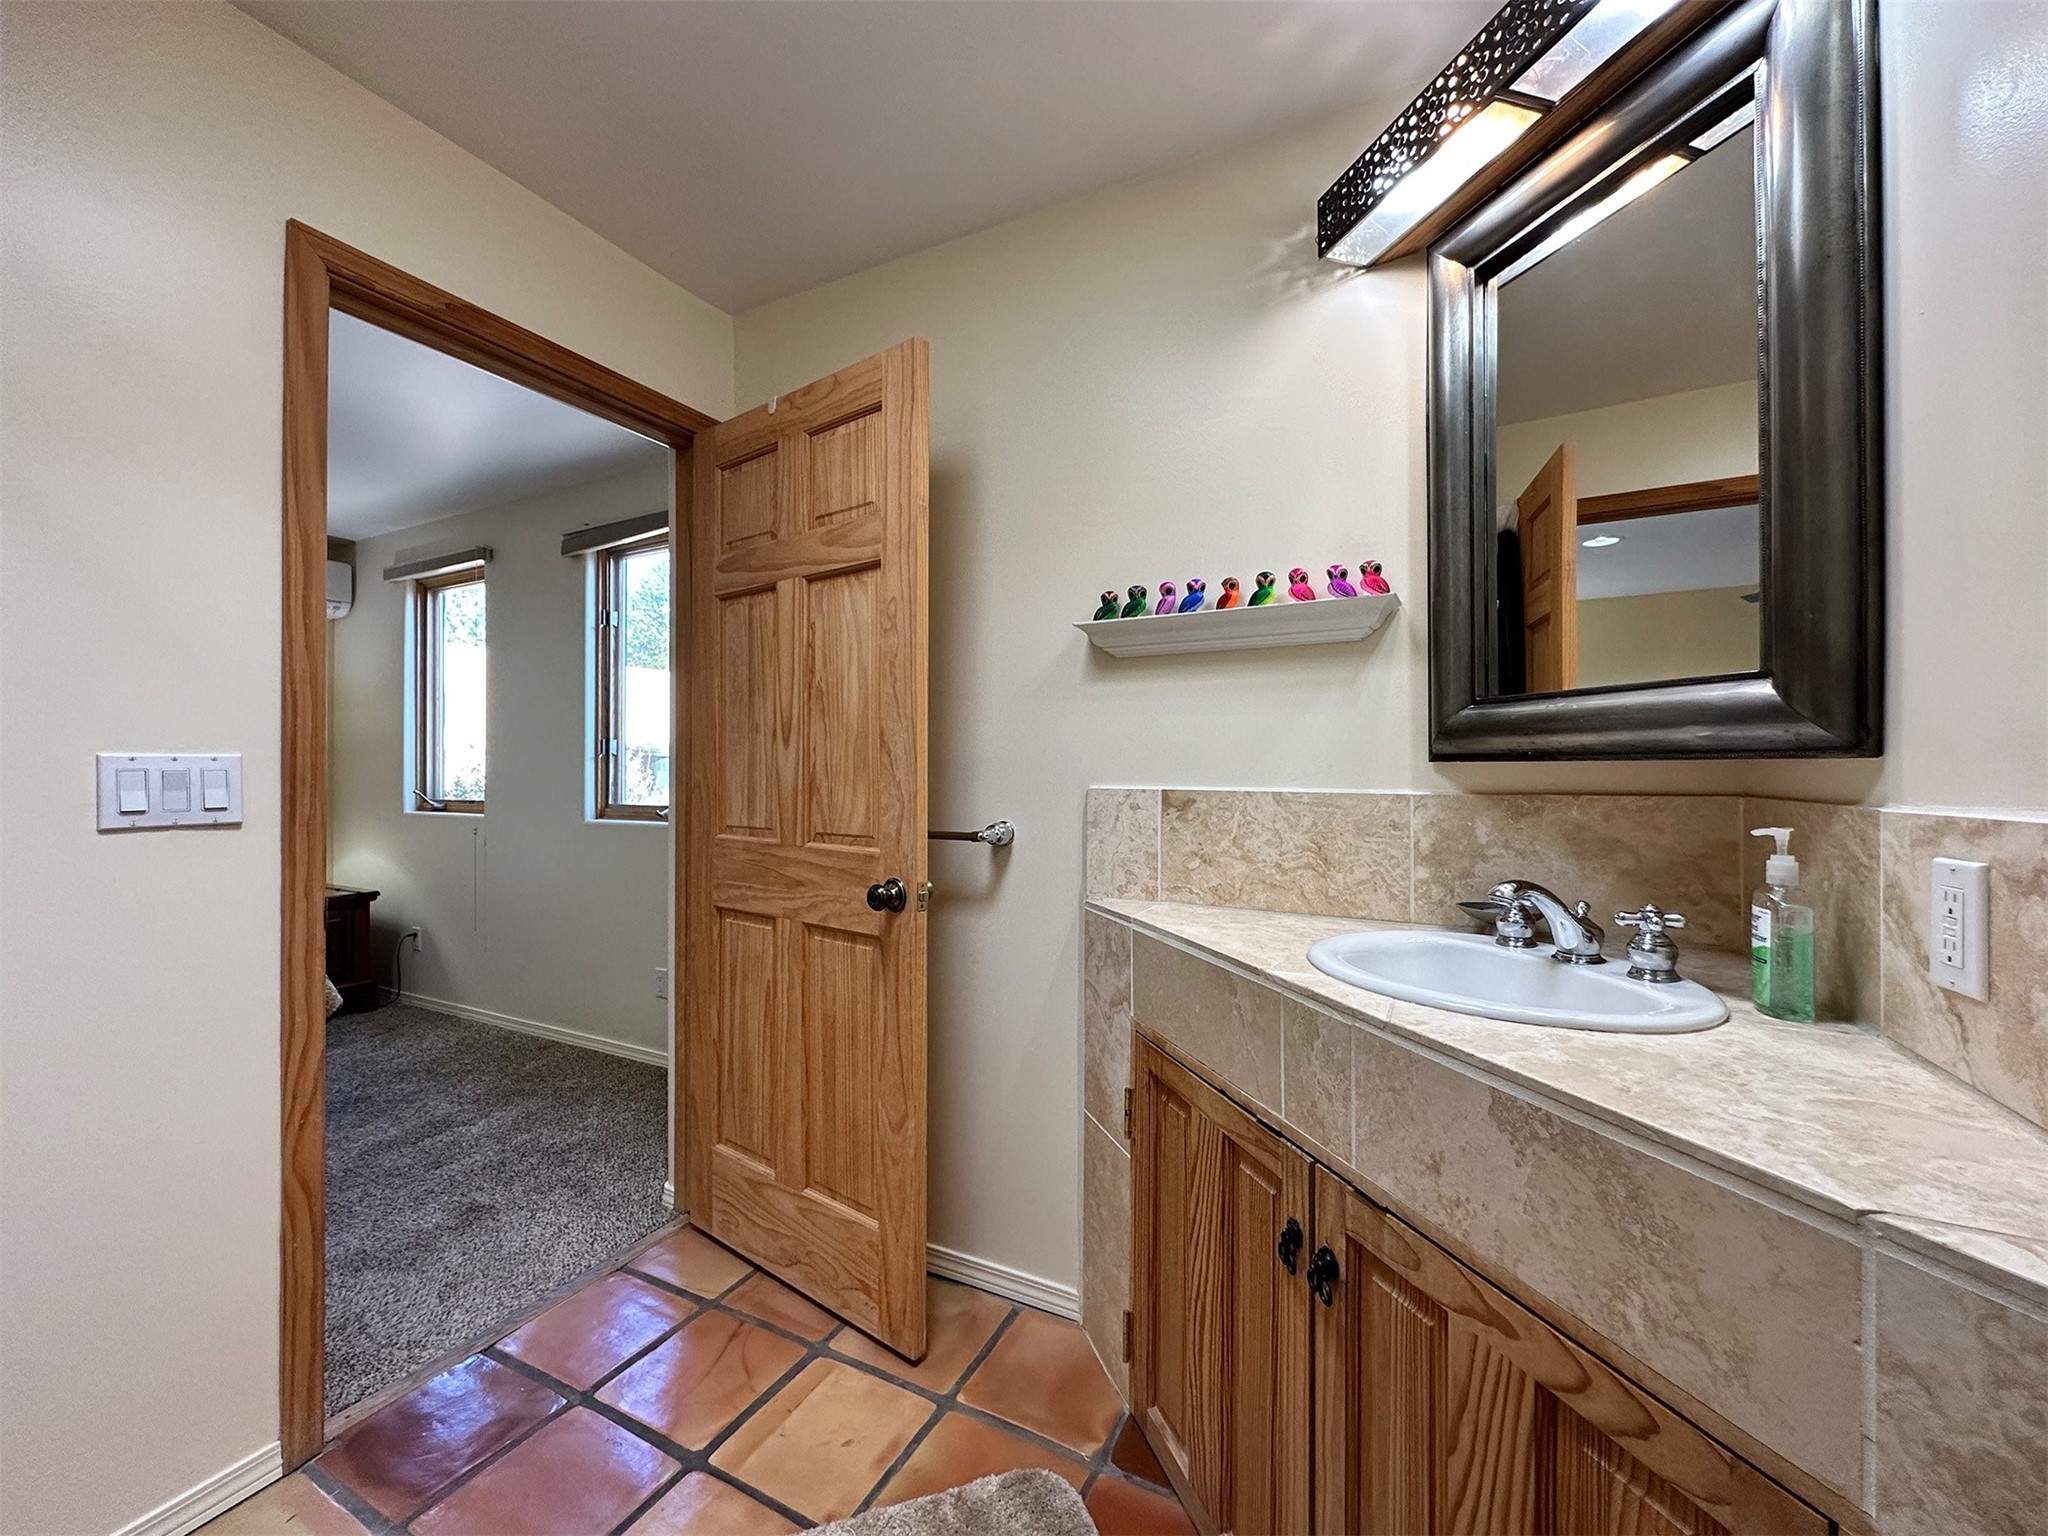 601 Don Canuto B, Santa Fe, New Mexico 87505, 2 Bedrooms Bedrooms, ,3 BathroomsBathrooms,Residential,For Sale,601 Don Canuto B,202337886